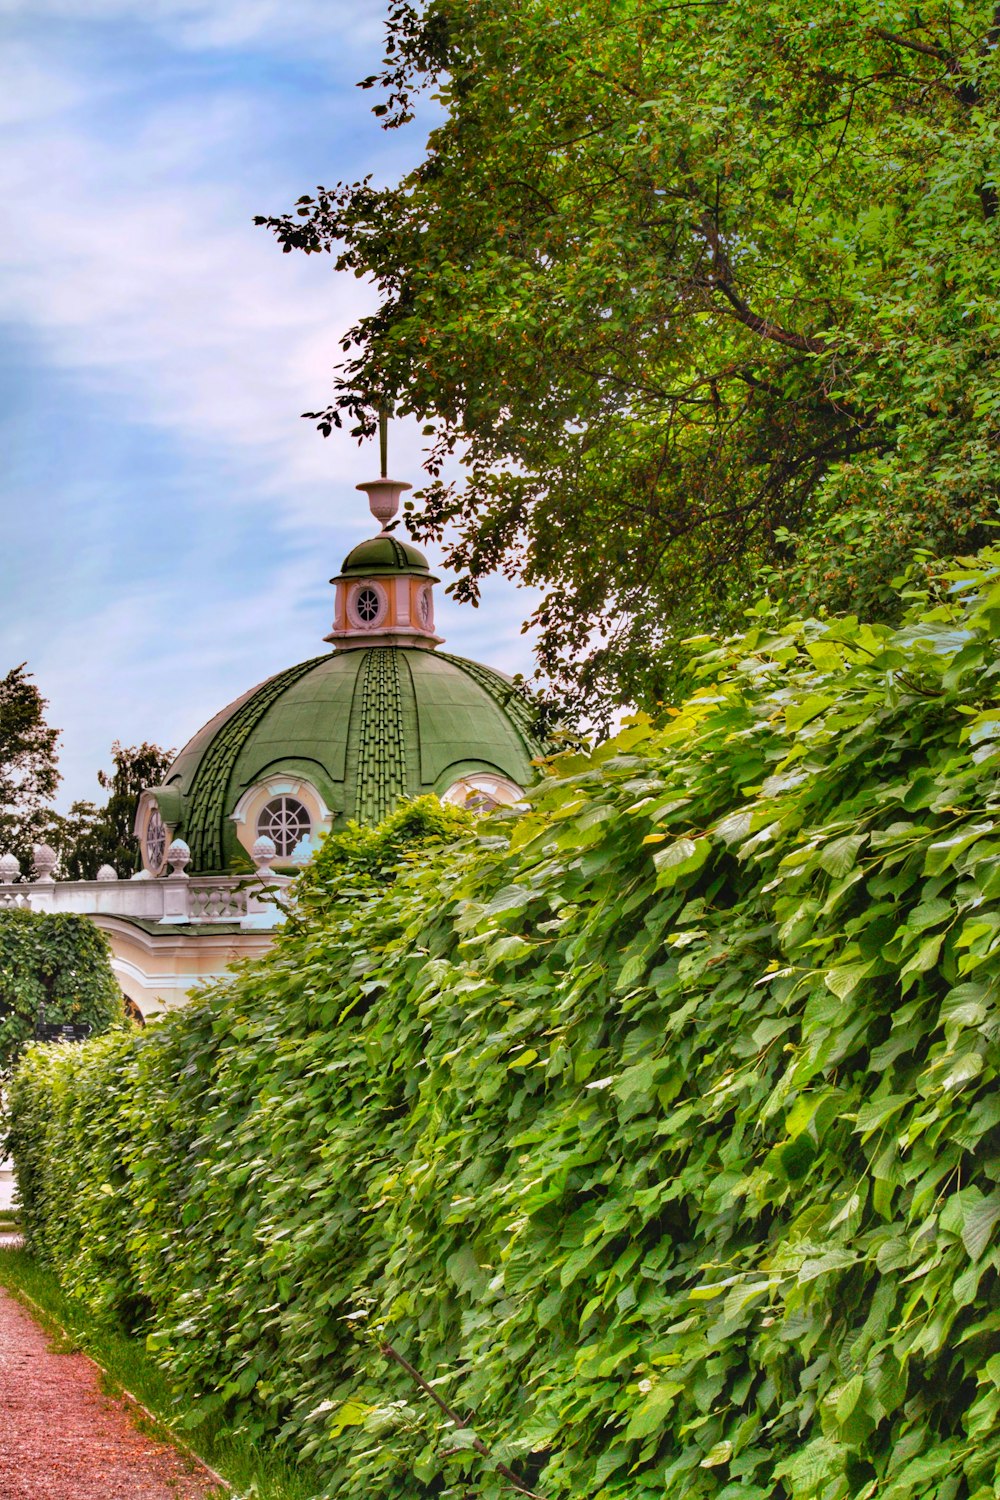 a green dome shaped building surrounded by bushes